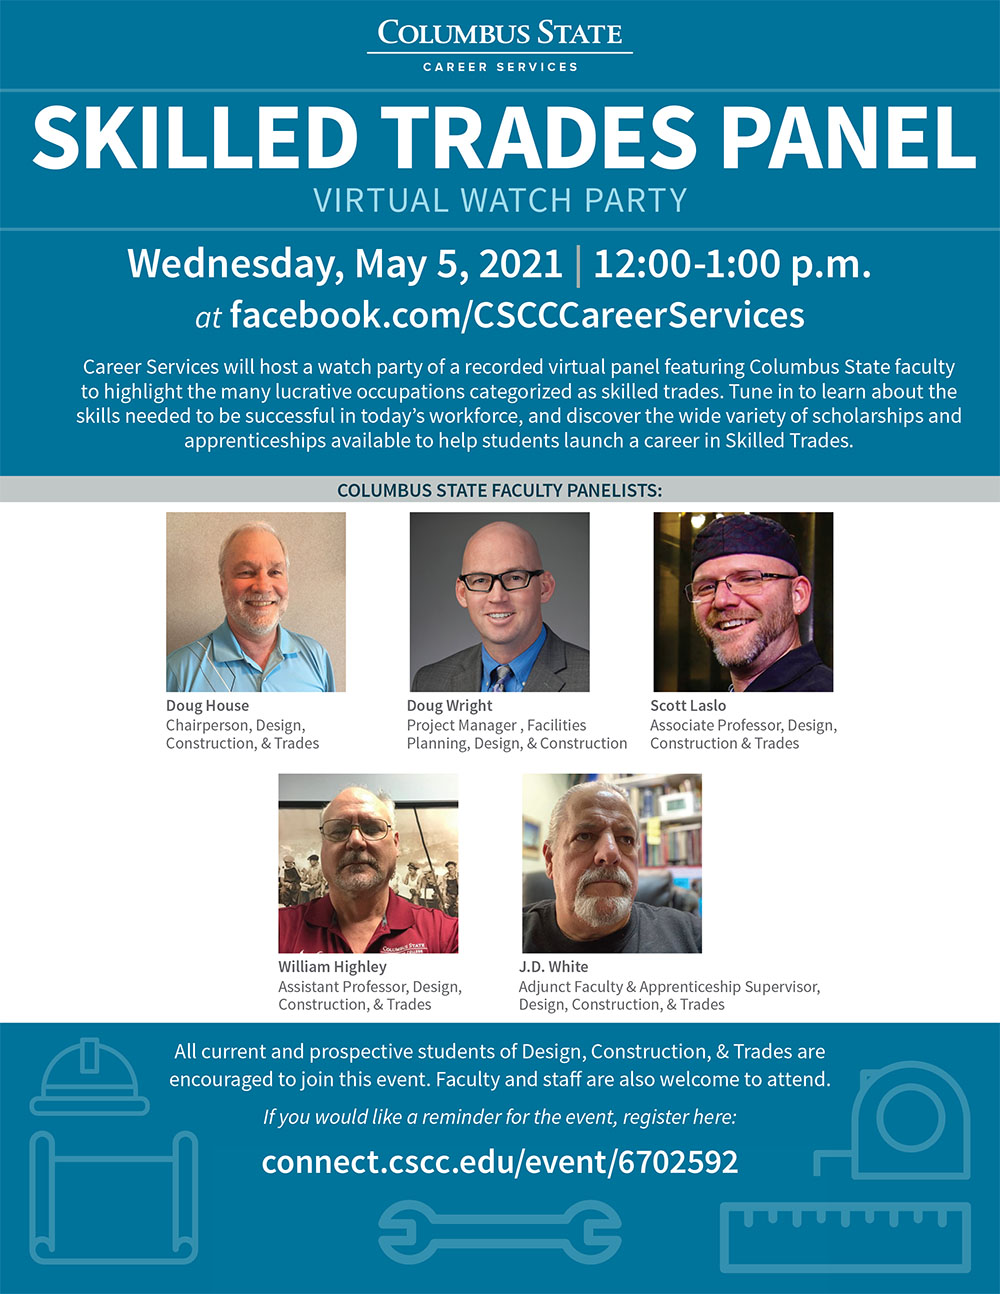 The poster for the Skilled Trade Panel event.